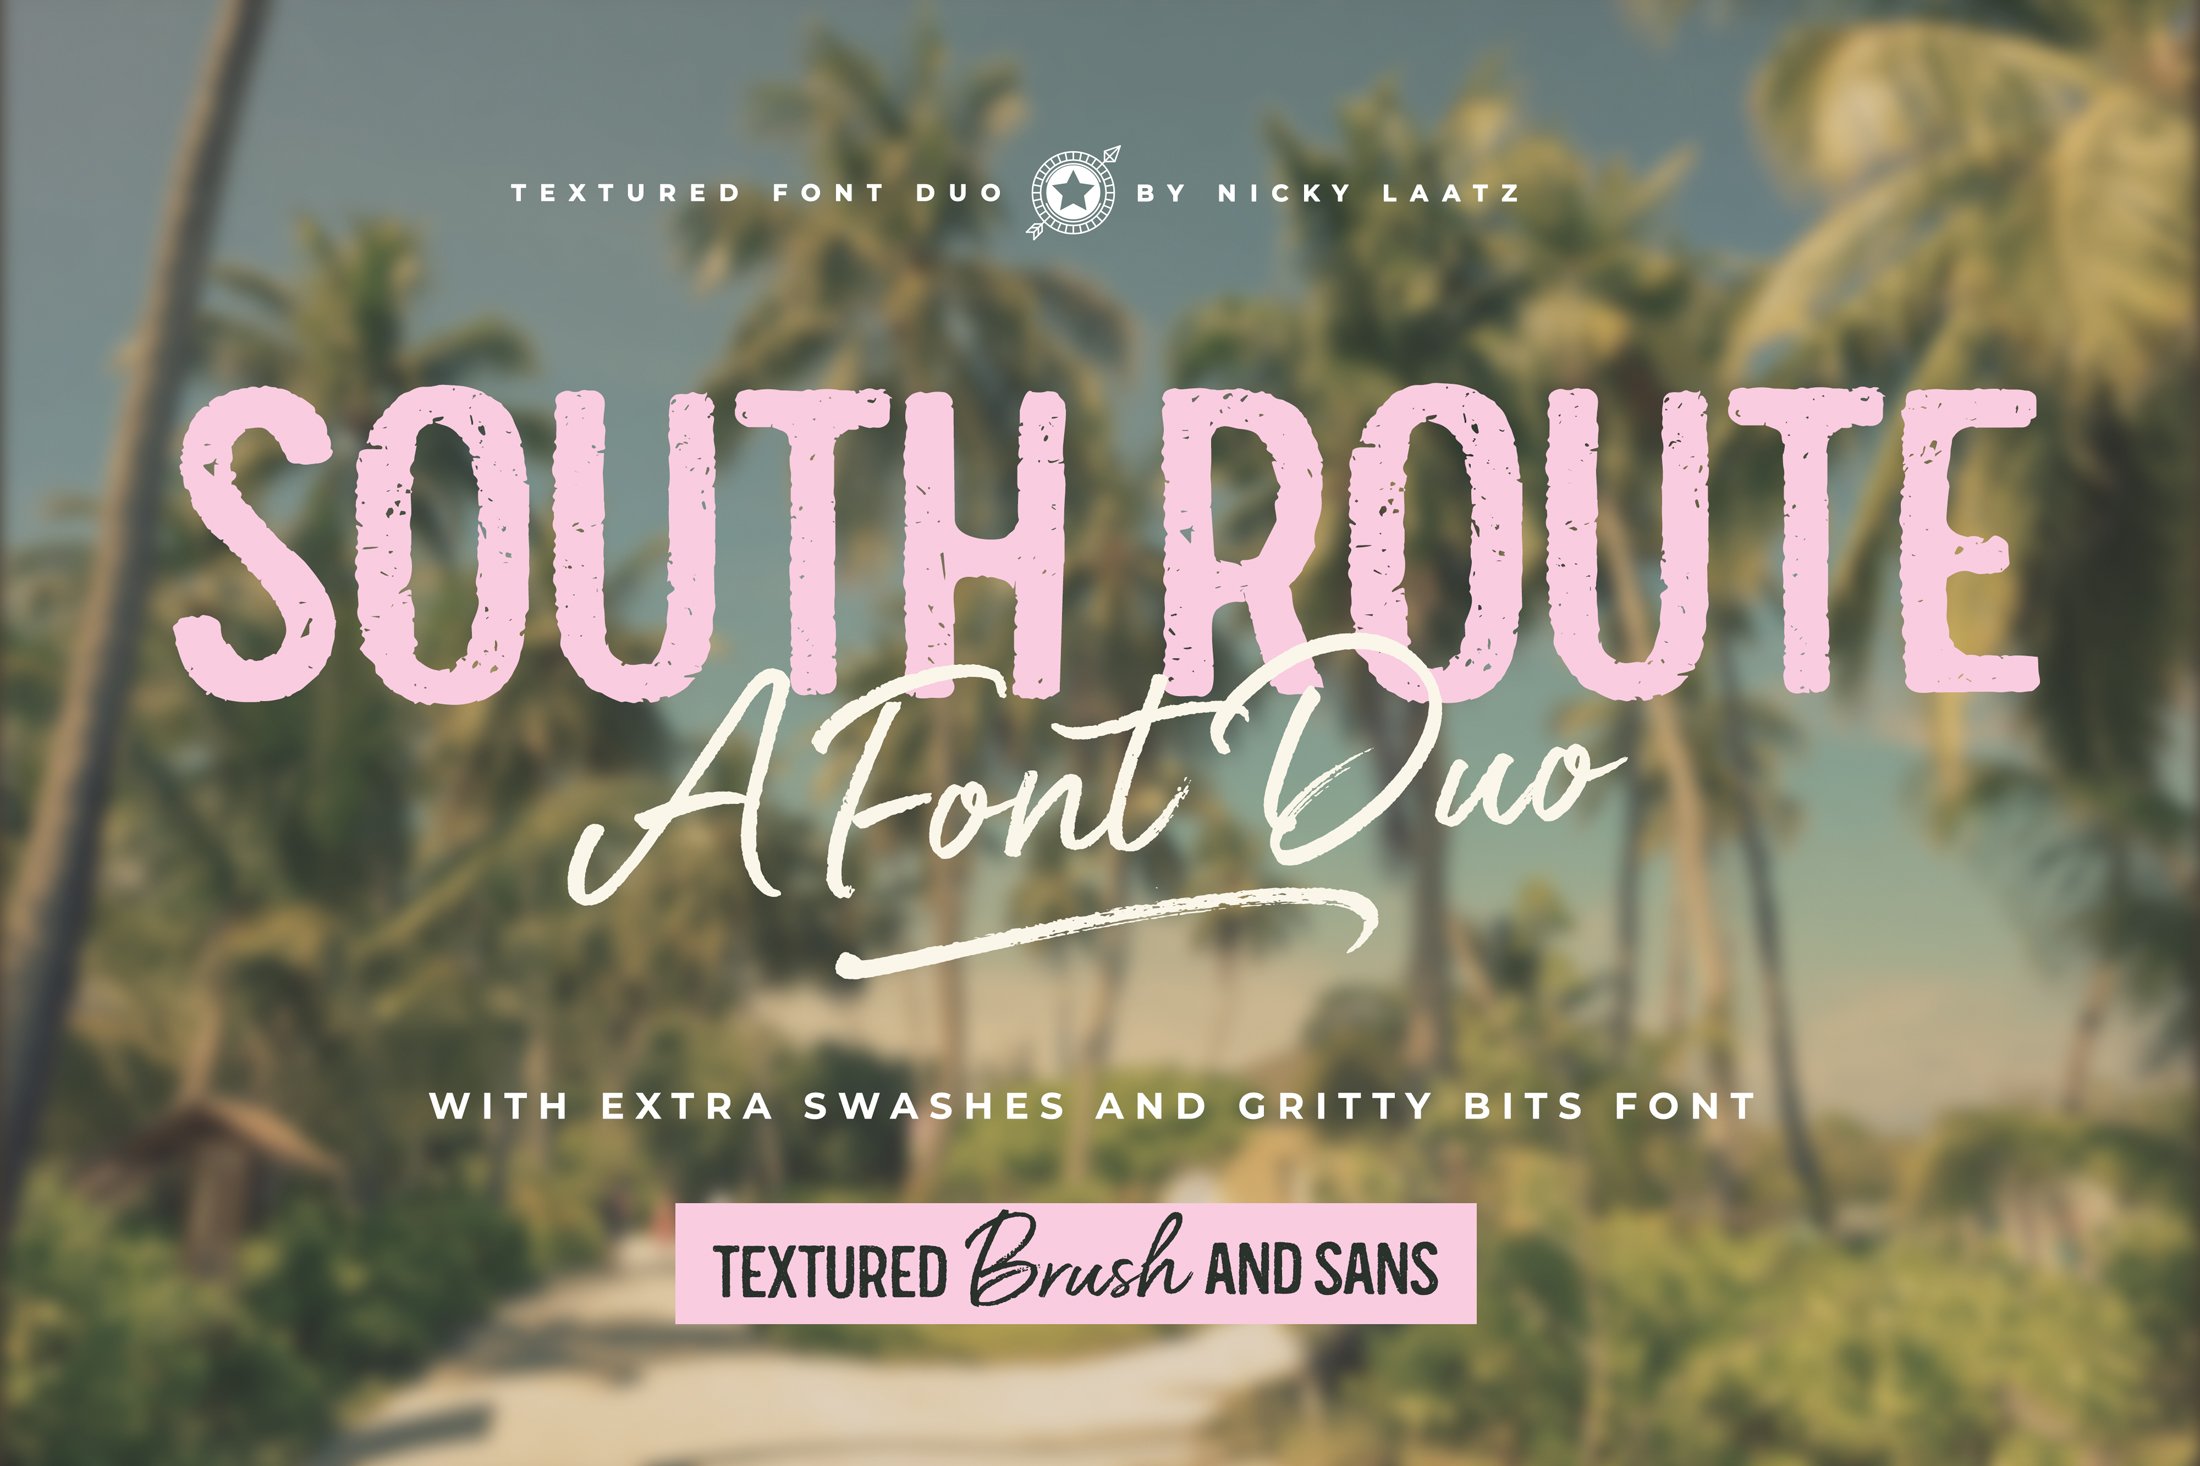 South Route Font Duo & Extras cover image.